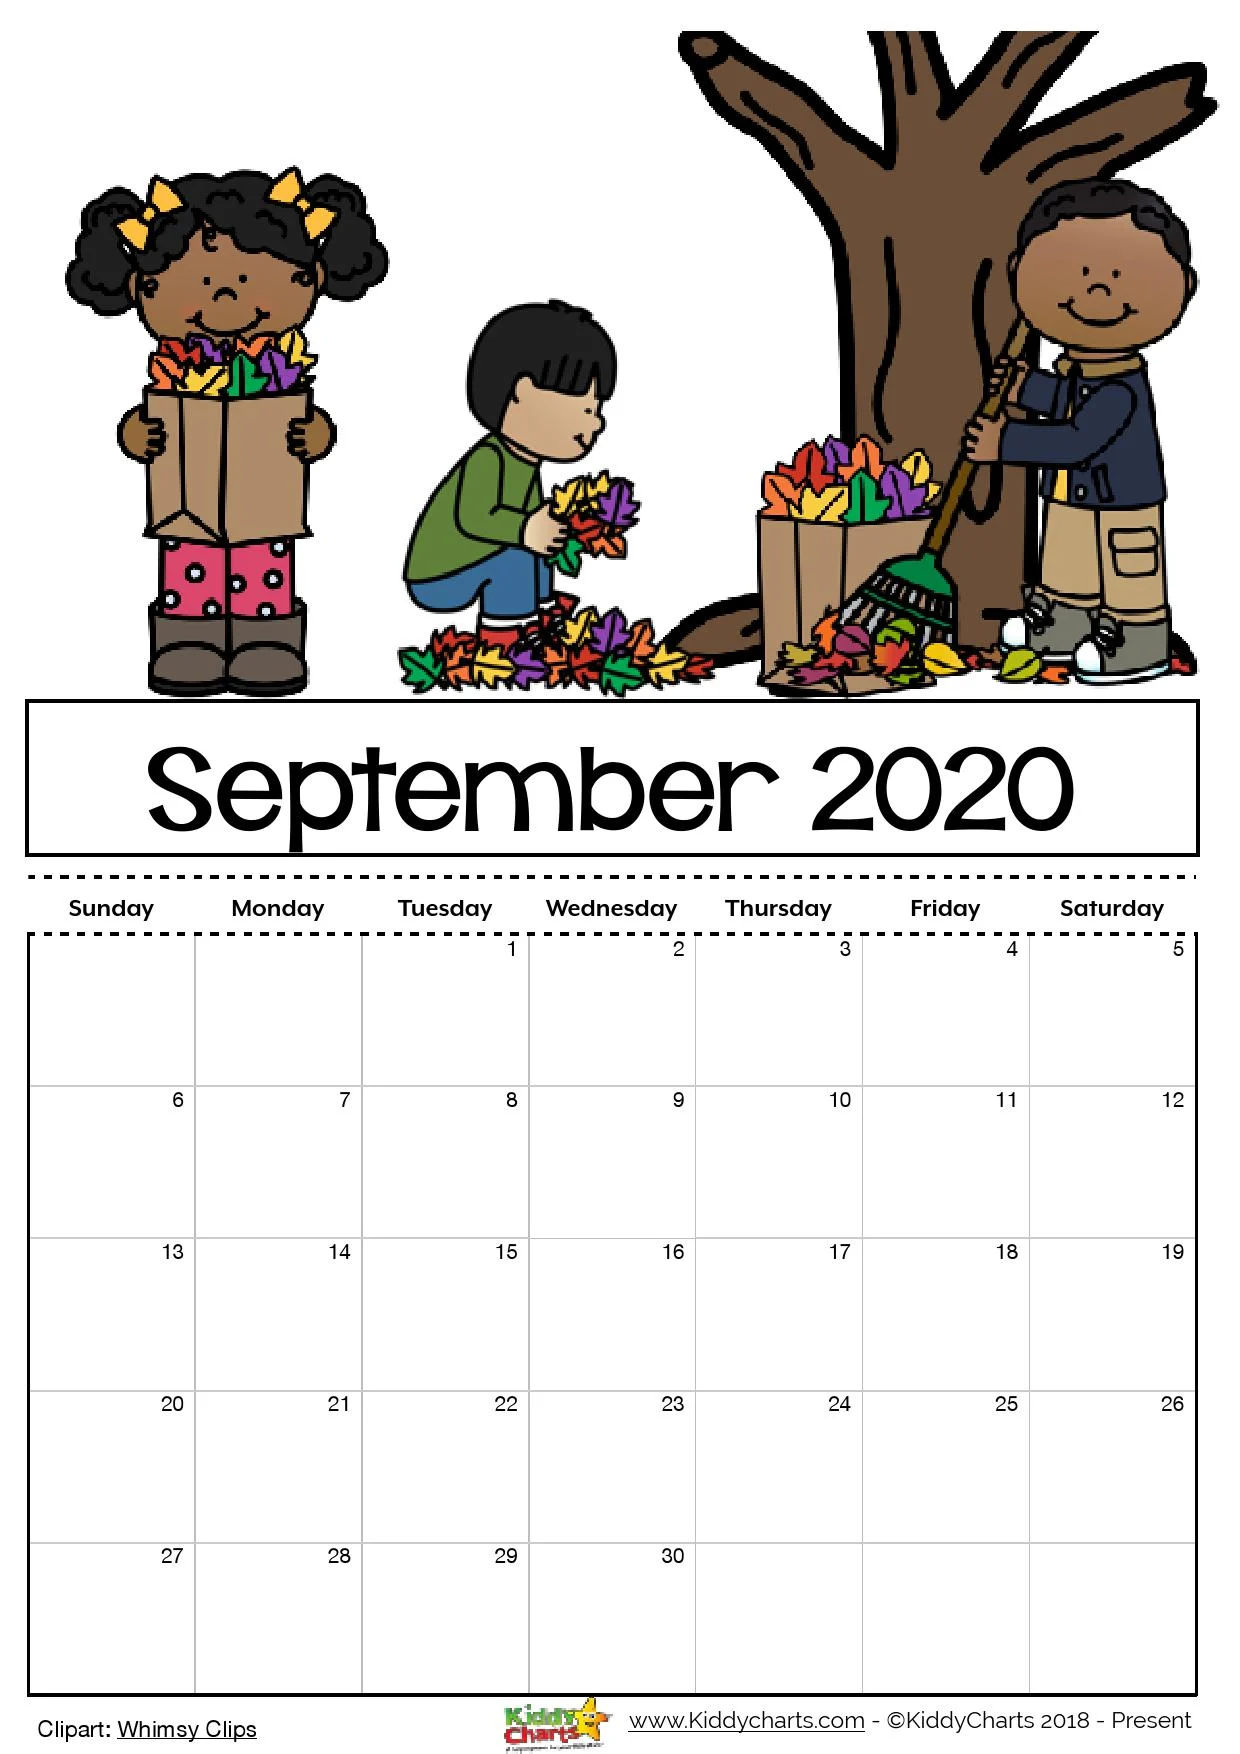 Looking for a calendar? Then we've got it for you - come take a look now! #calendar2020 #printables #kidsprintables #calendars #kids